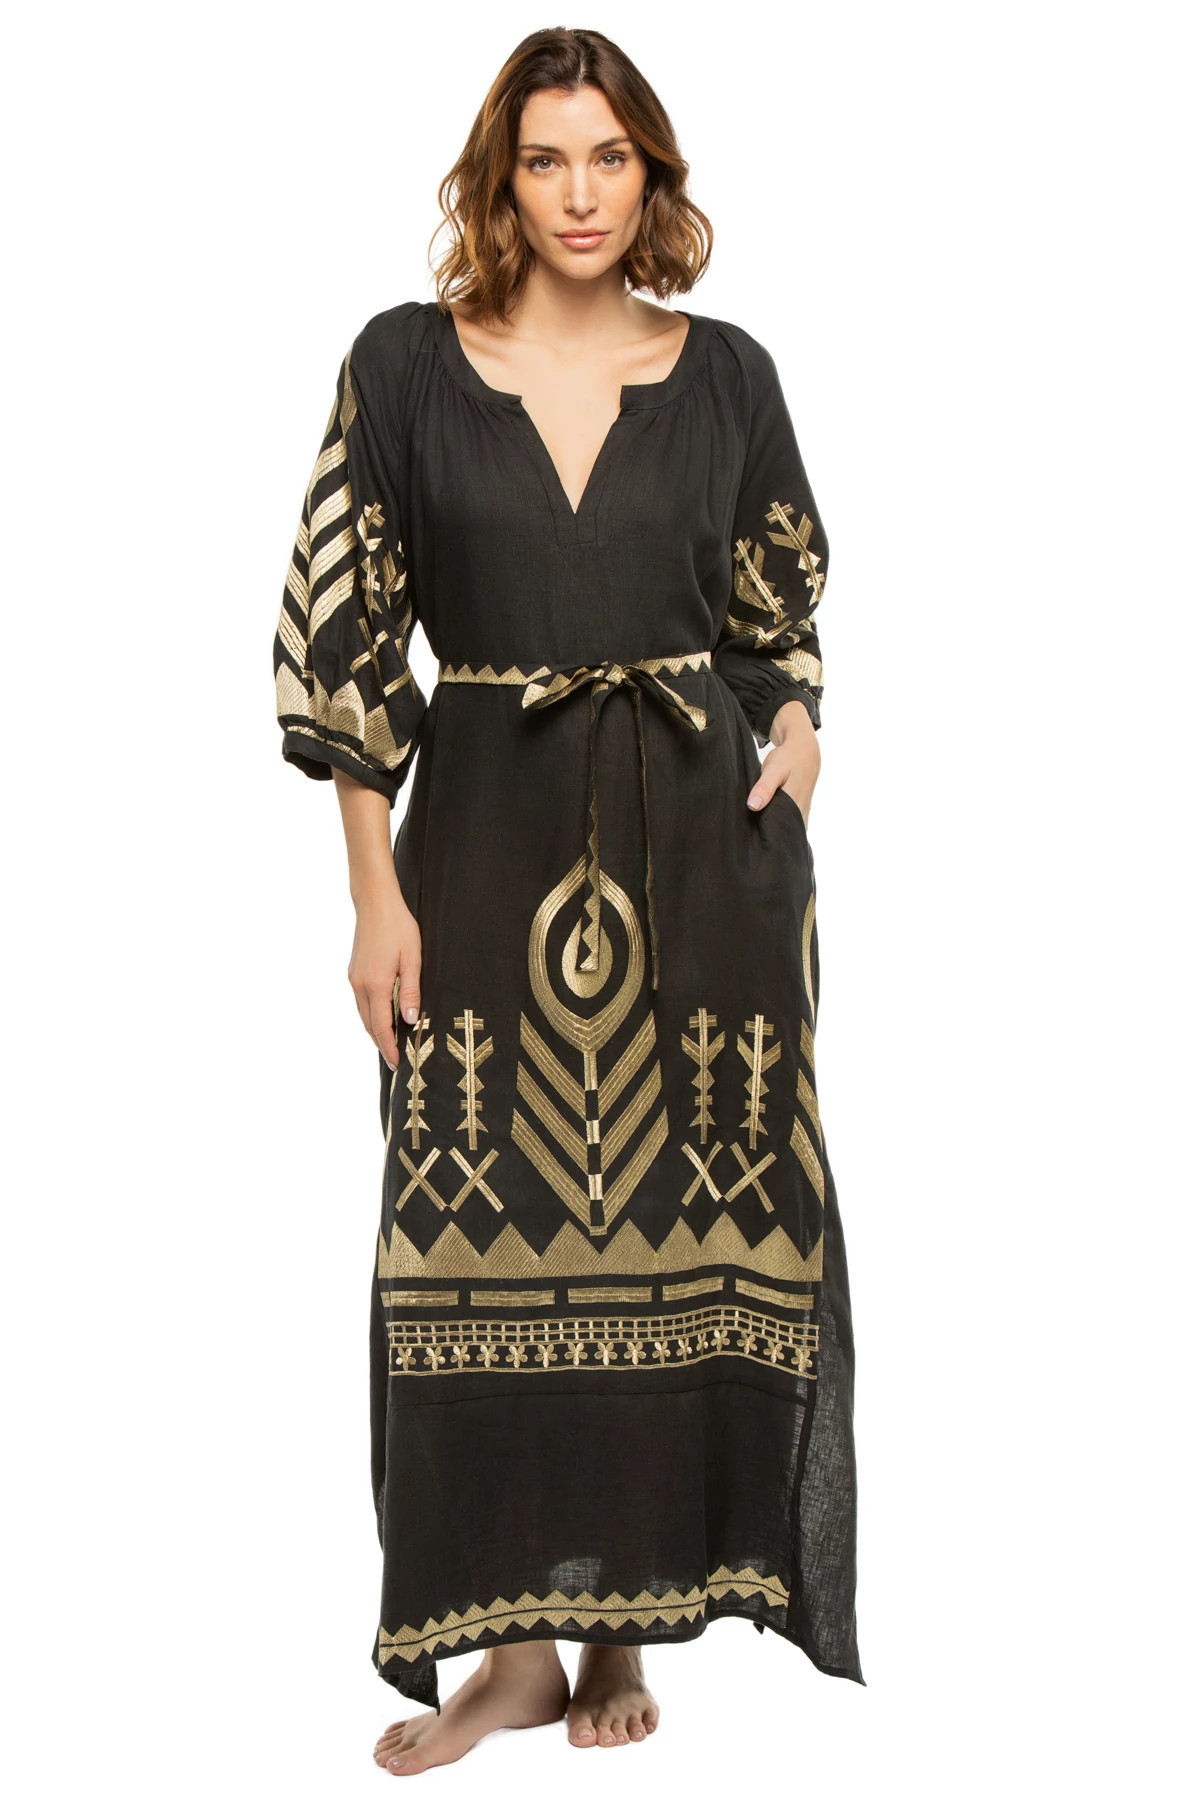 BLACK GOLD Metallic Embroidered Maxi Dress image number 1